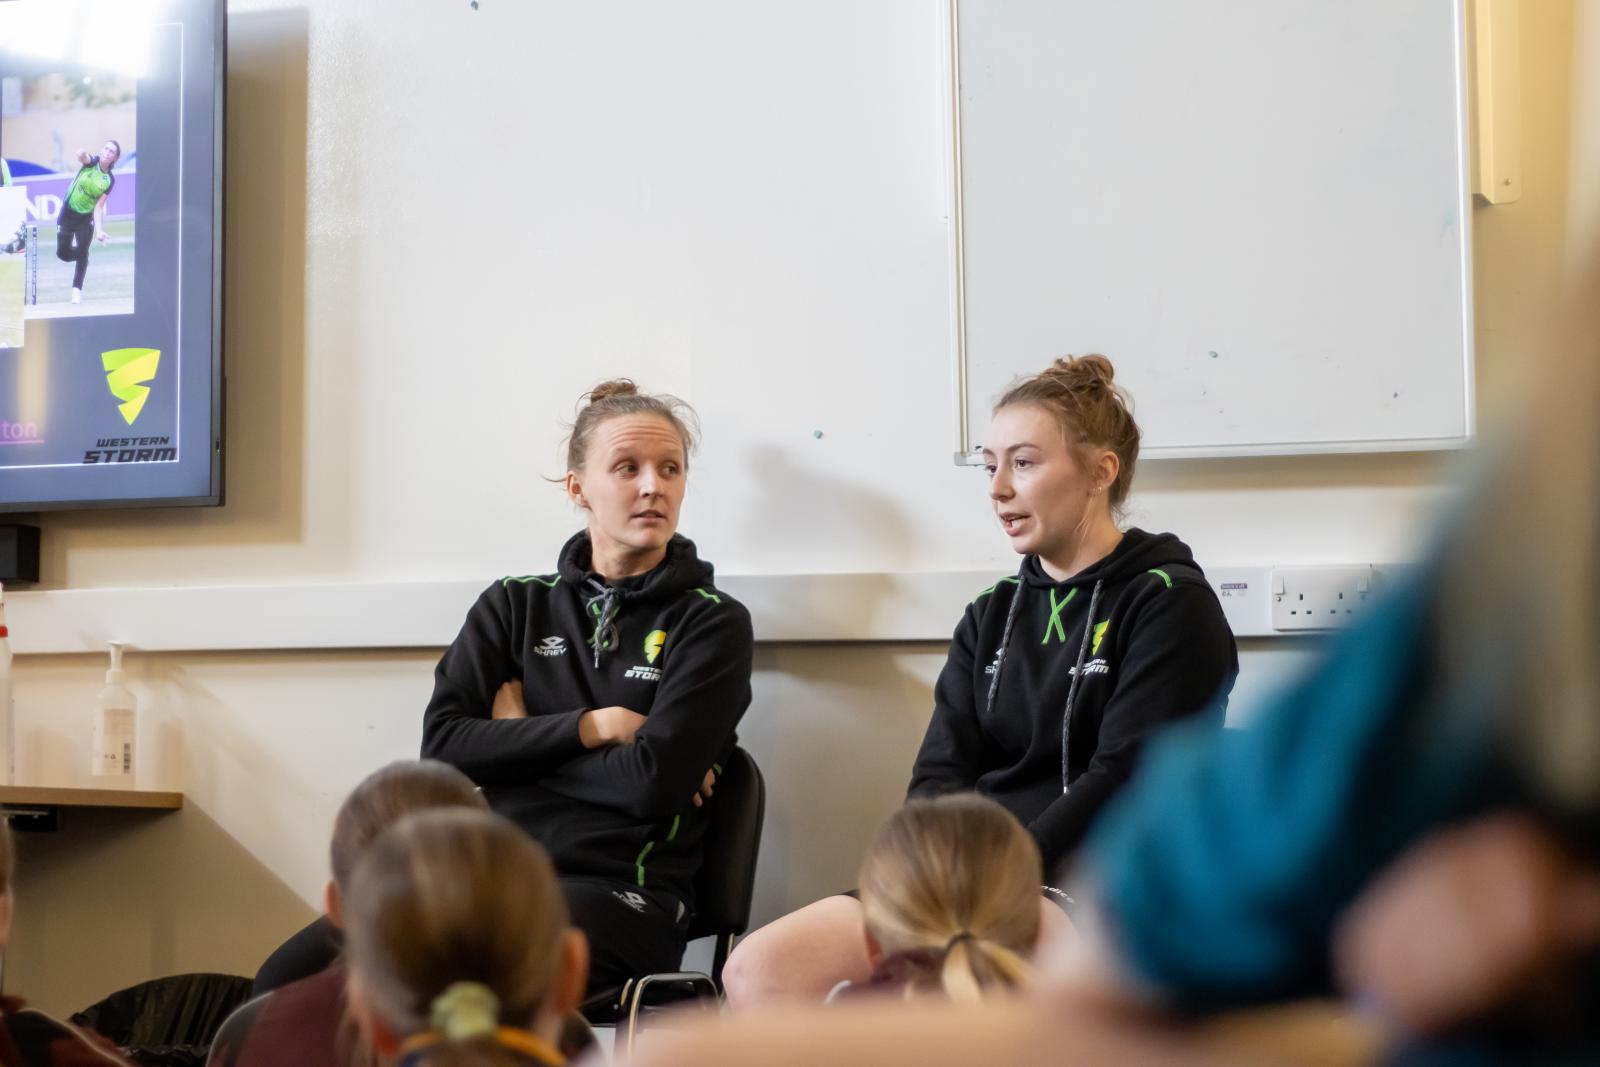 Lauren (left) and Chloe spoke about their cricket careers and answered questions from the girls and members of staff.